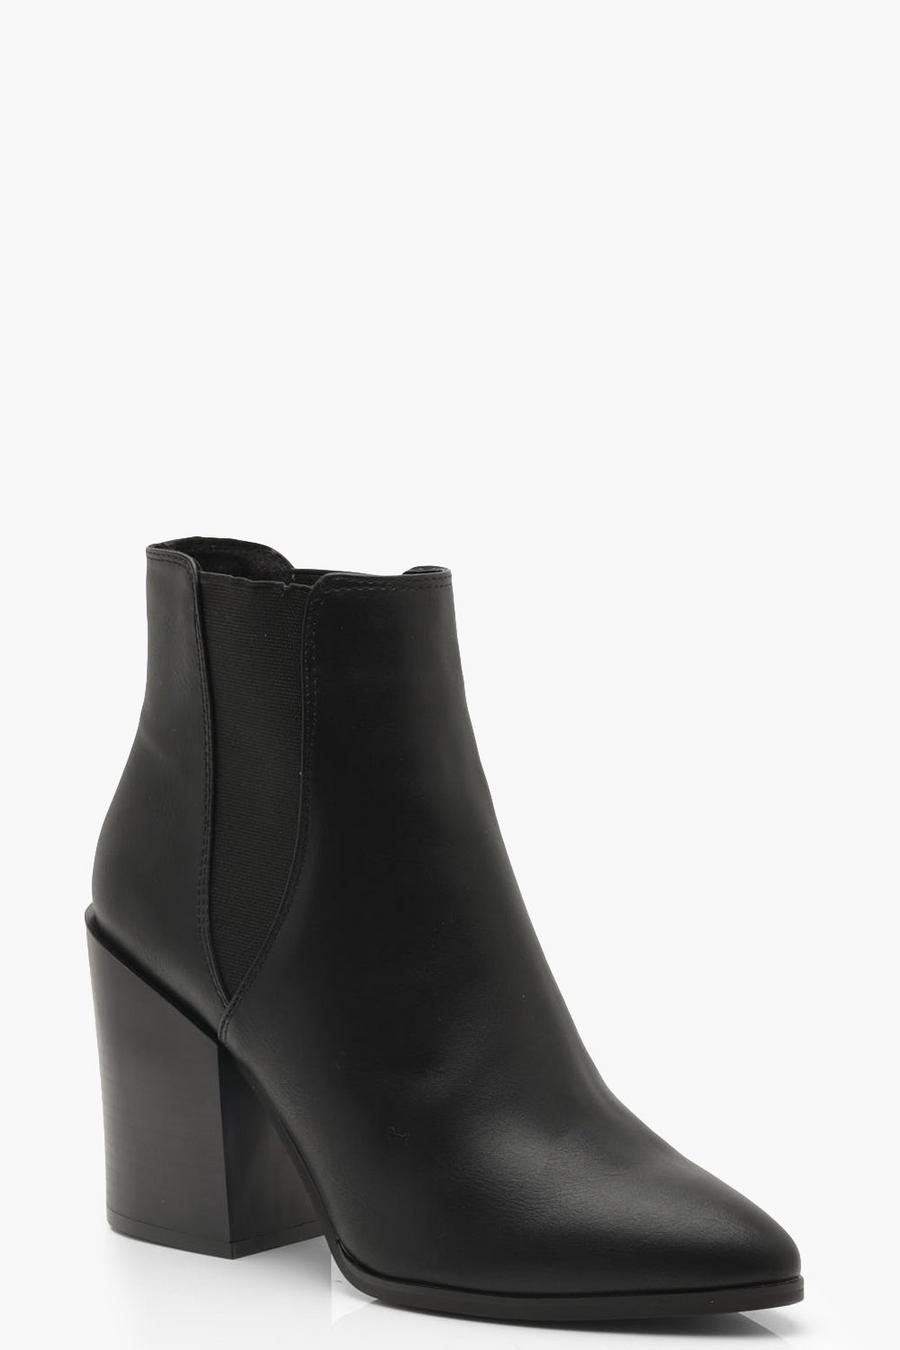 Black Pointed Chelsea Style Western Boots image number 1